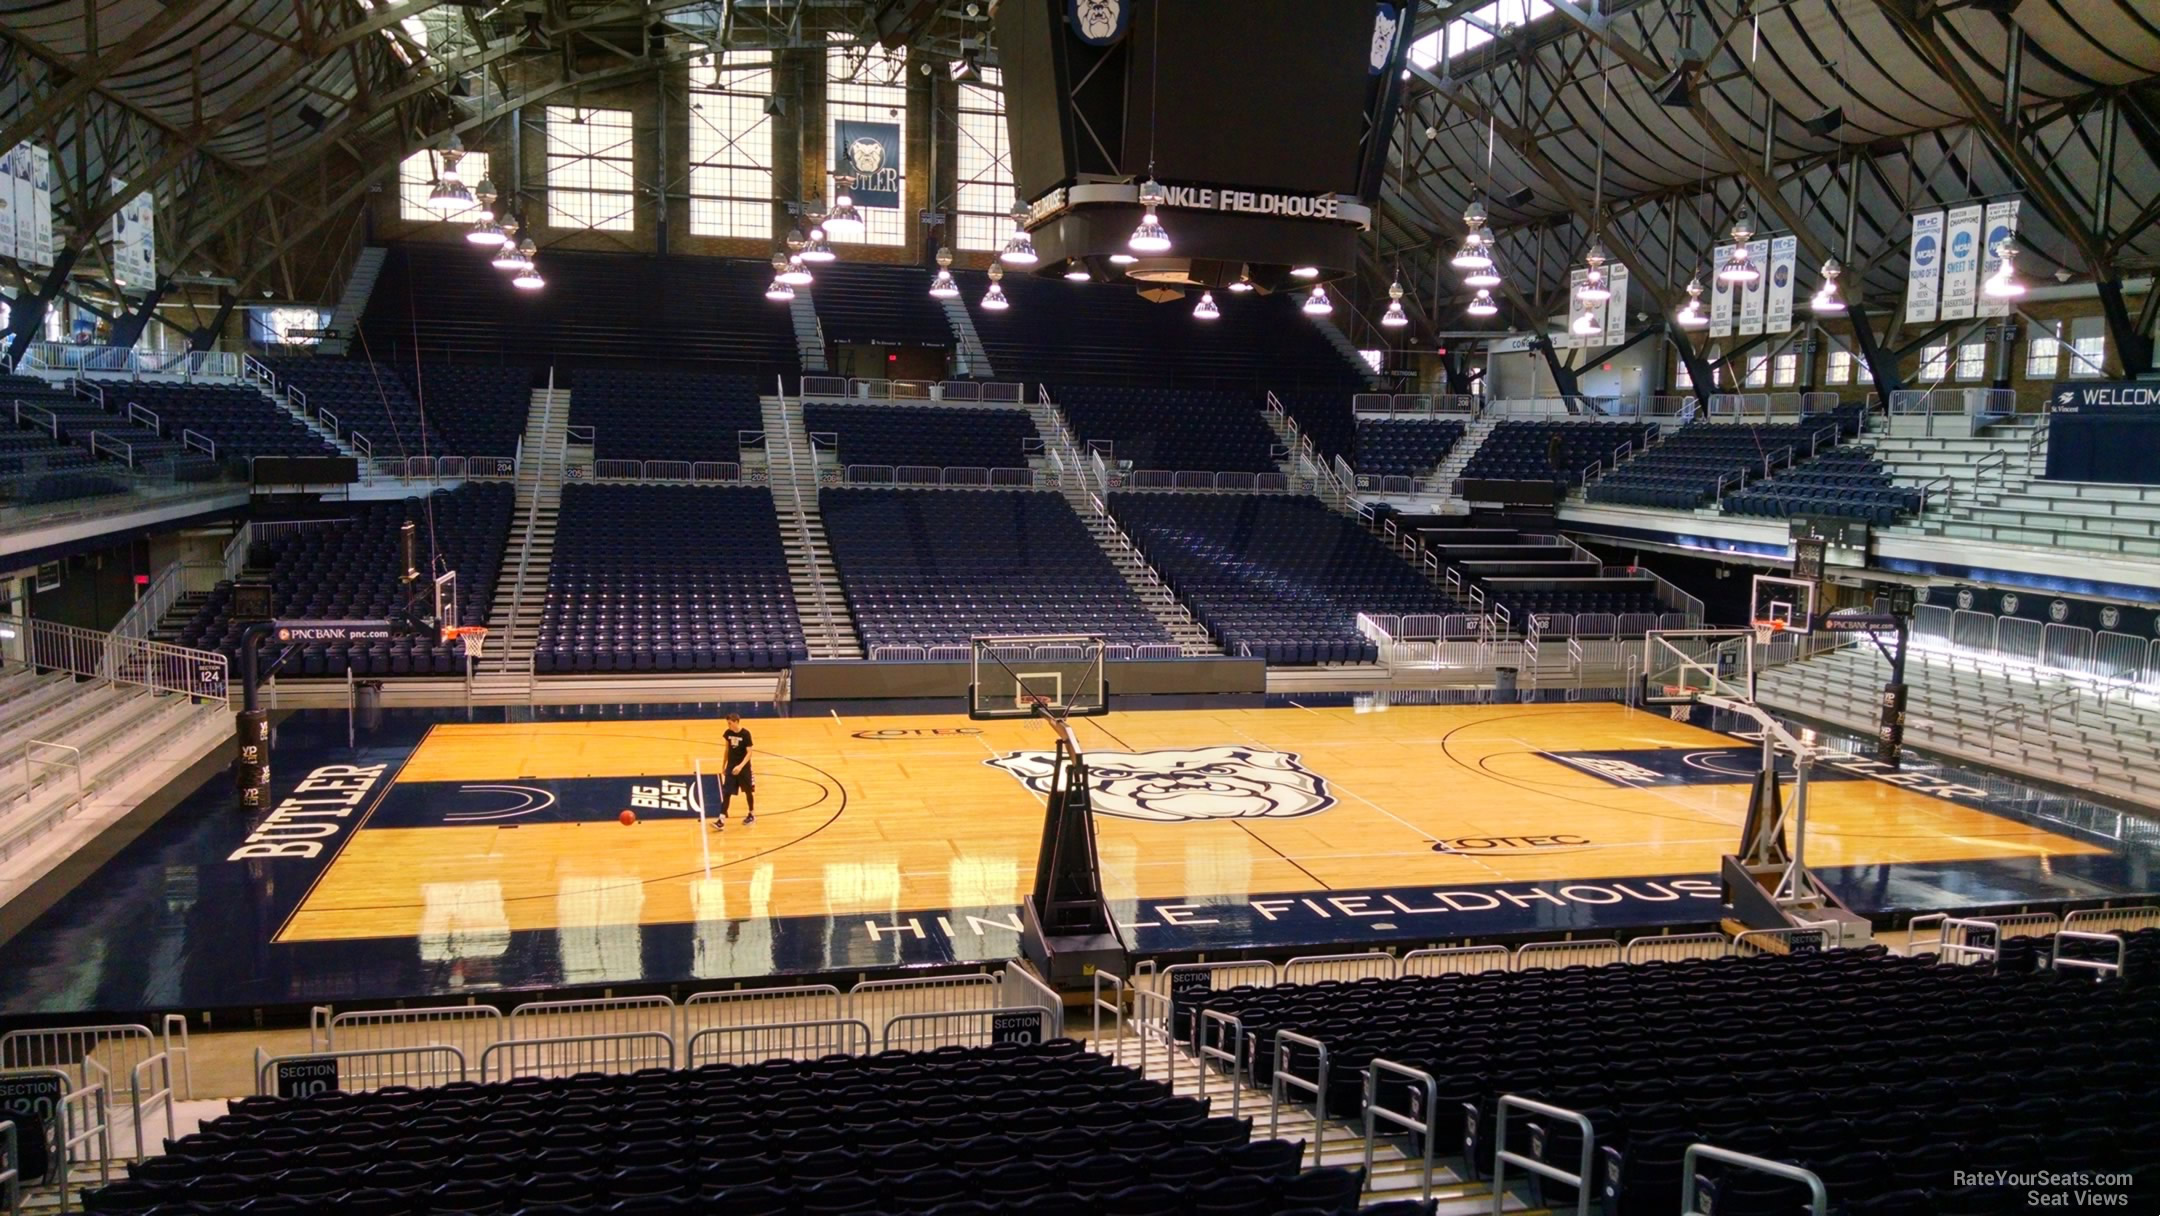 section 219, row 3 seat view  - hinkle fieldhouse